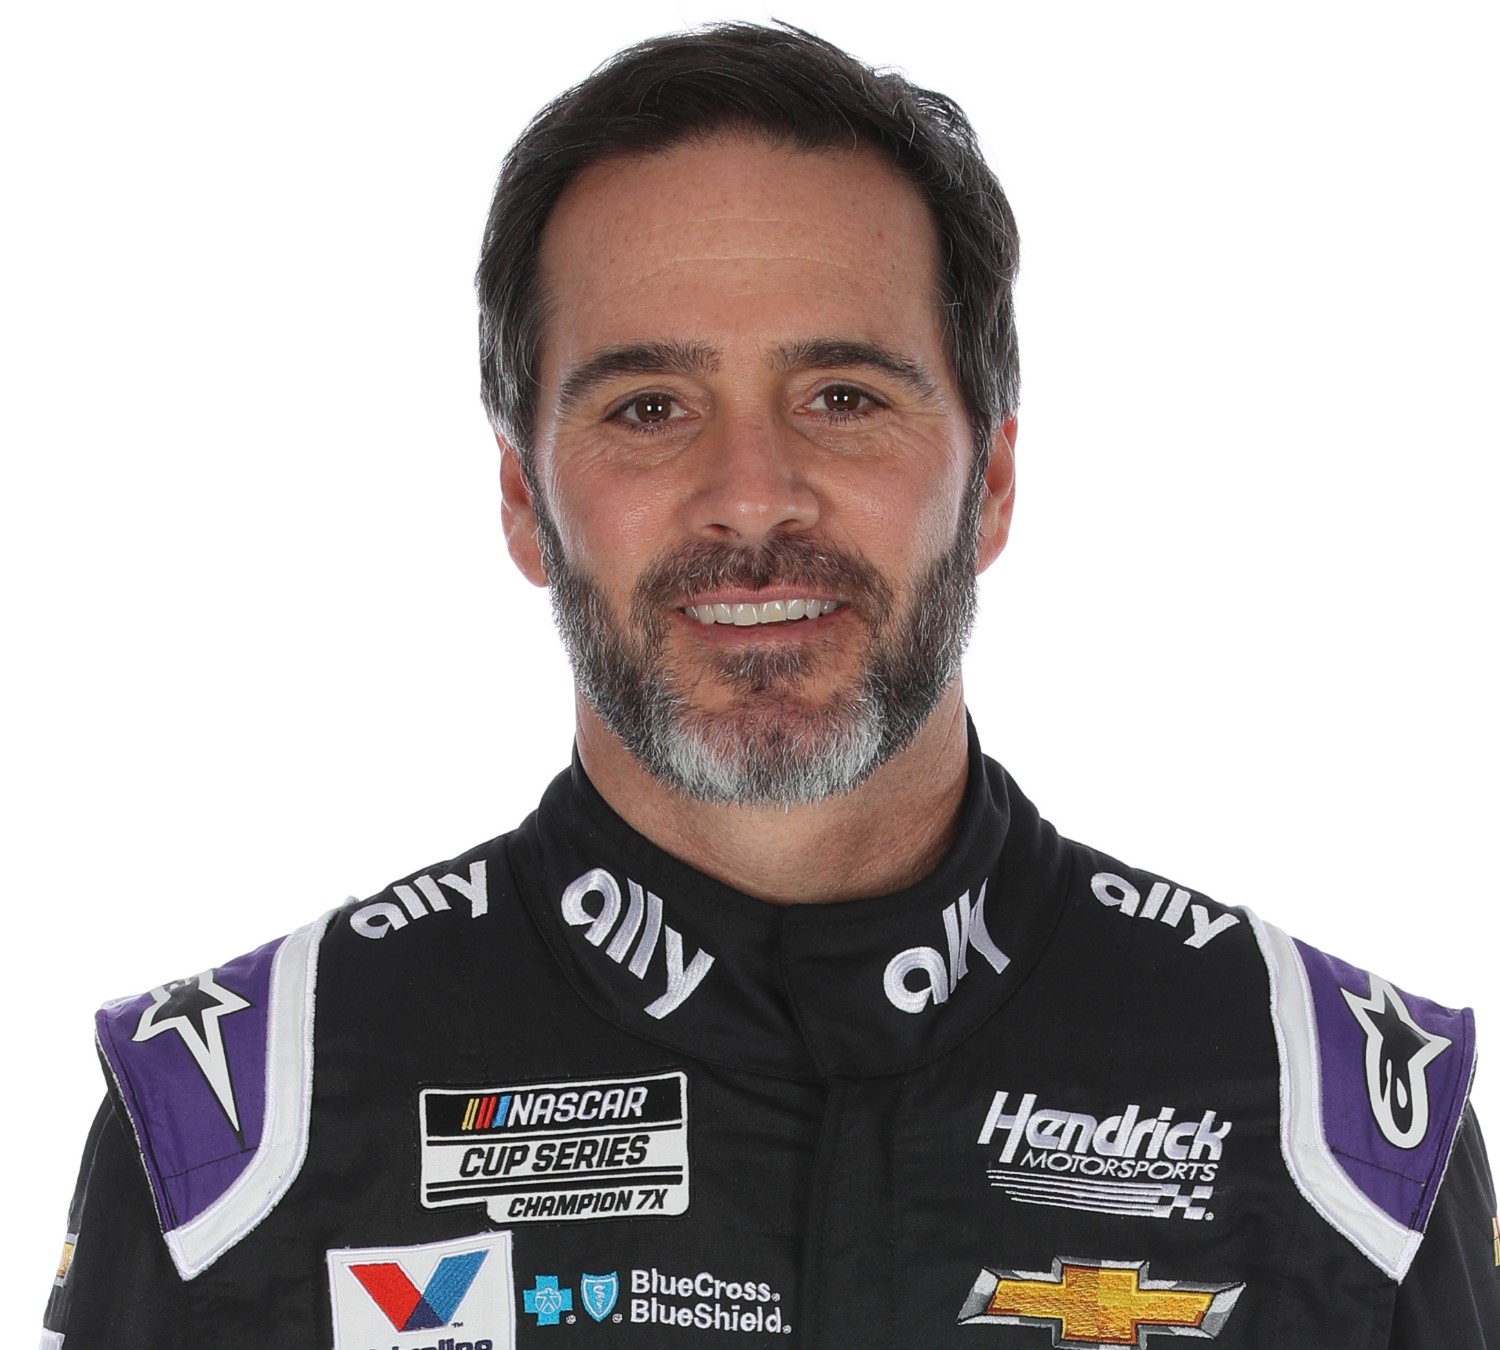 Jimmie Johnson realizes his reflexes are not what they used to be